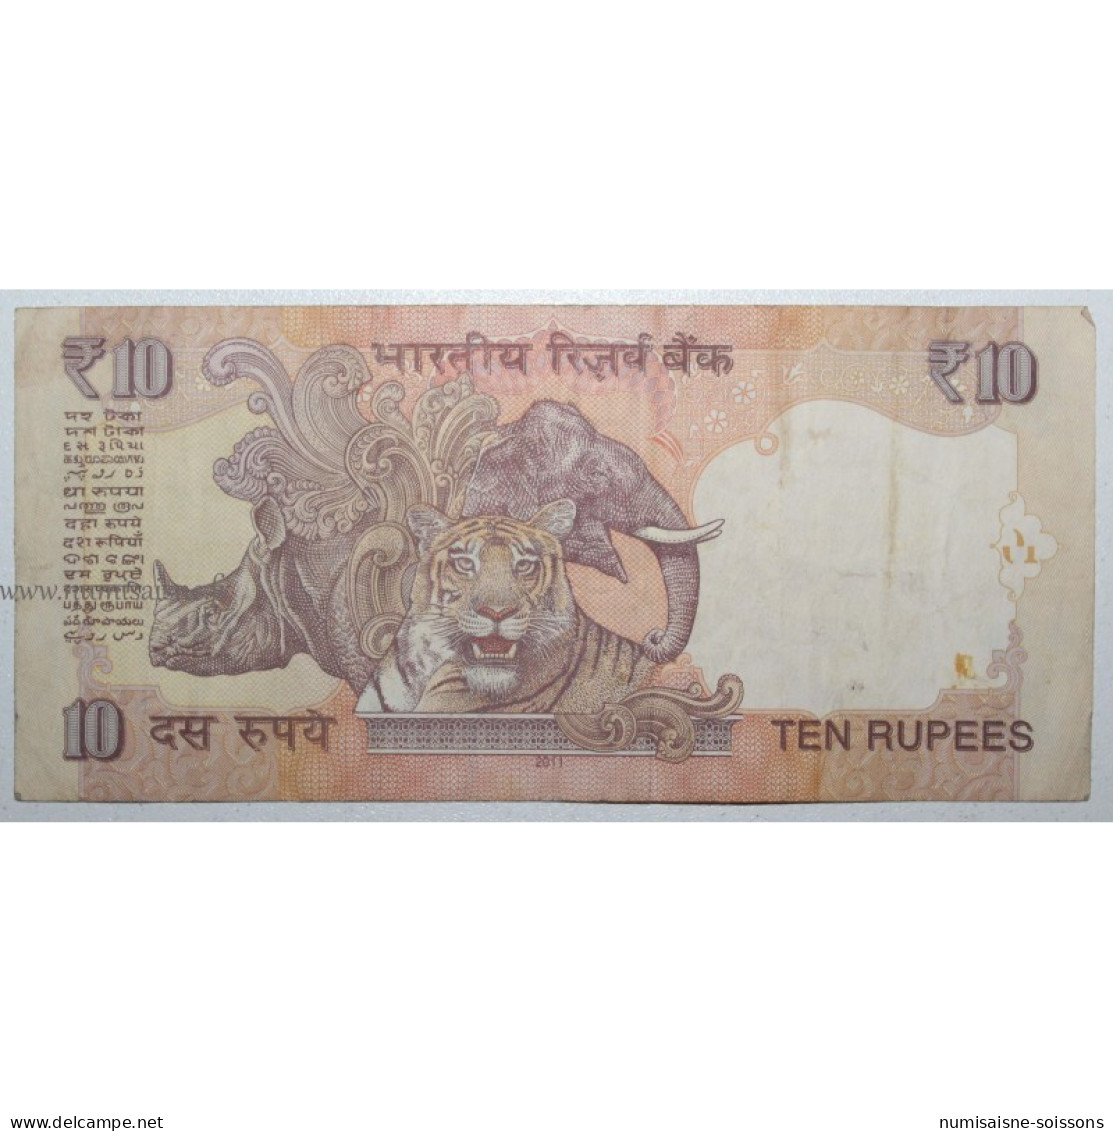 INDE - PICK 89 A - 10 RUPEES - NON DATE (1996) - TB - Inde